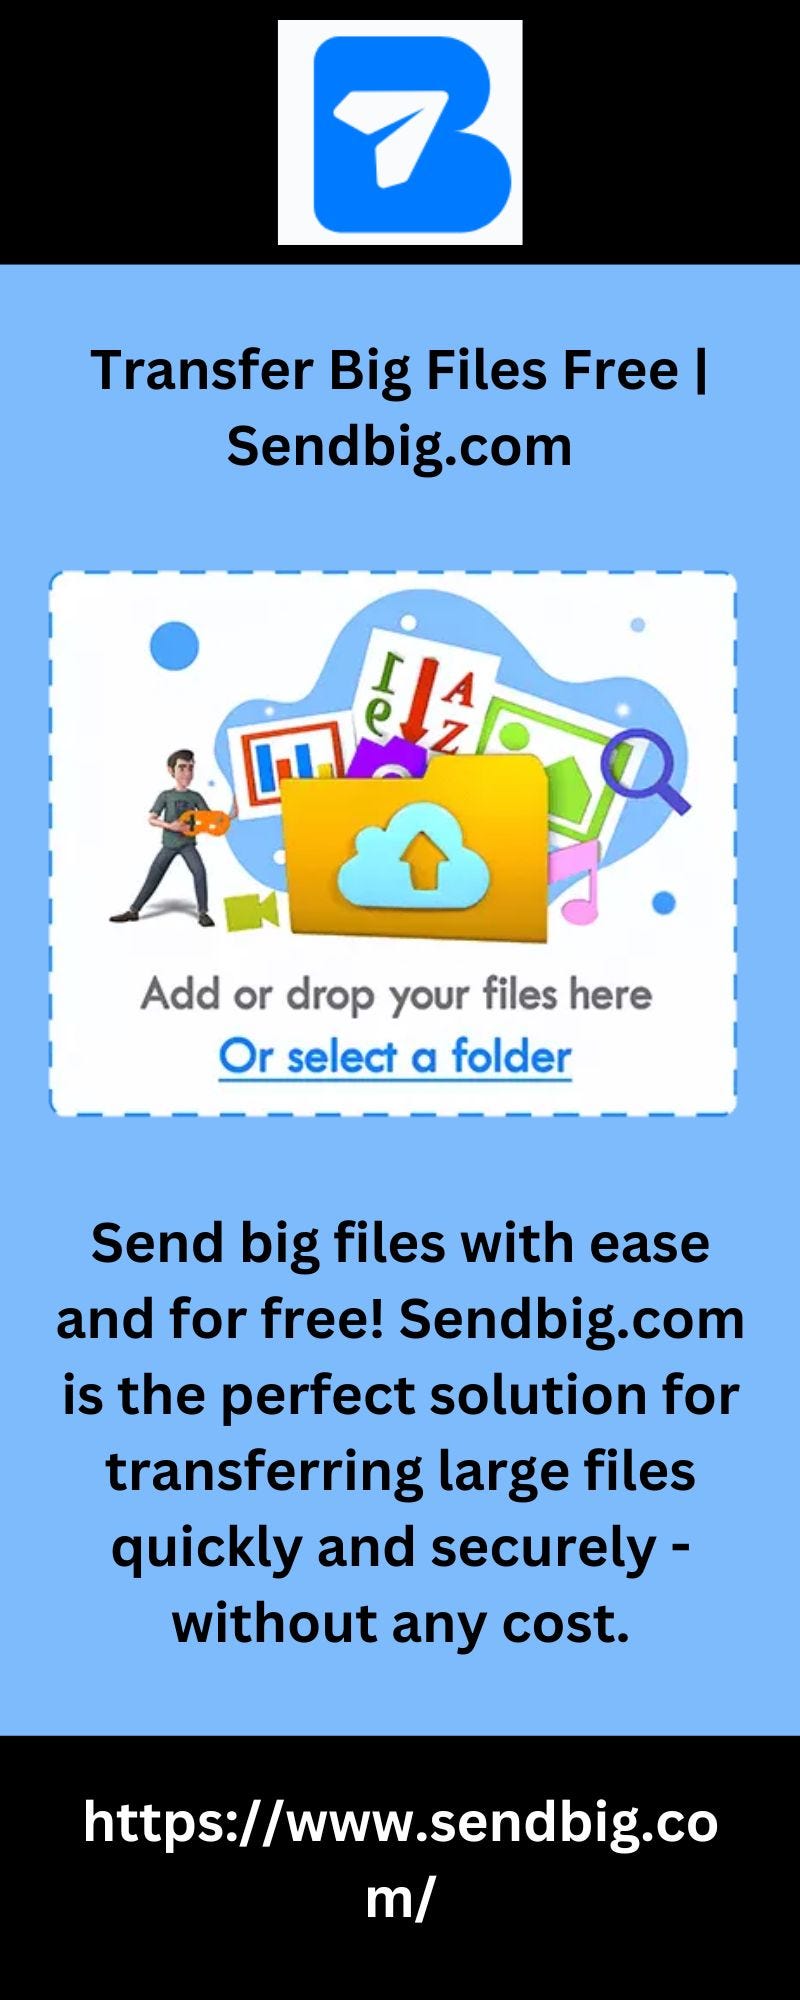 Need A Big File Transfer? How To Send Large Files For Free